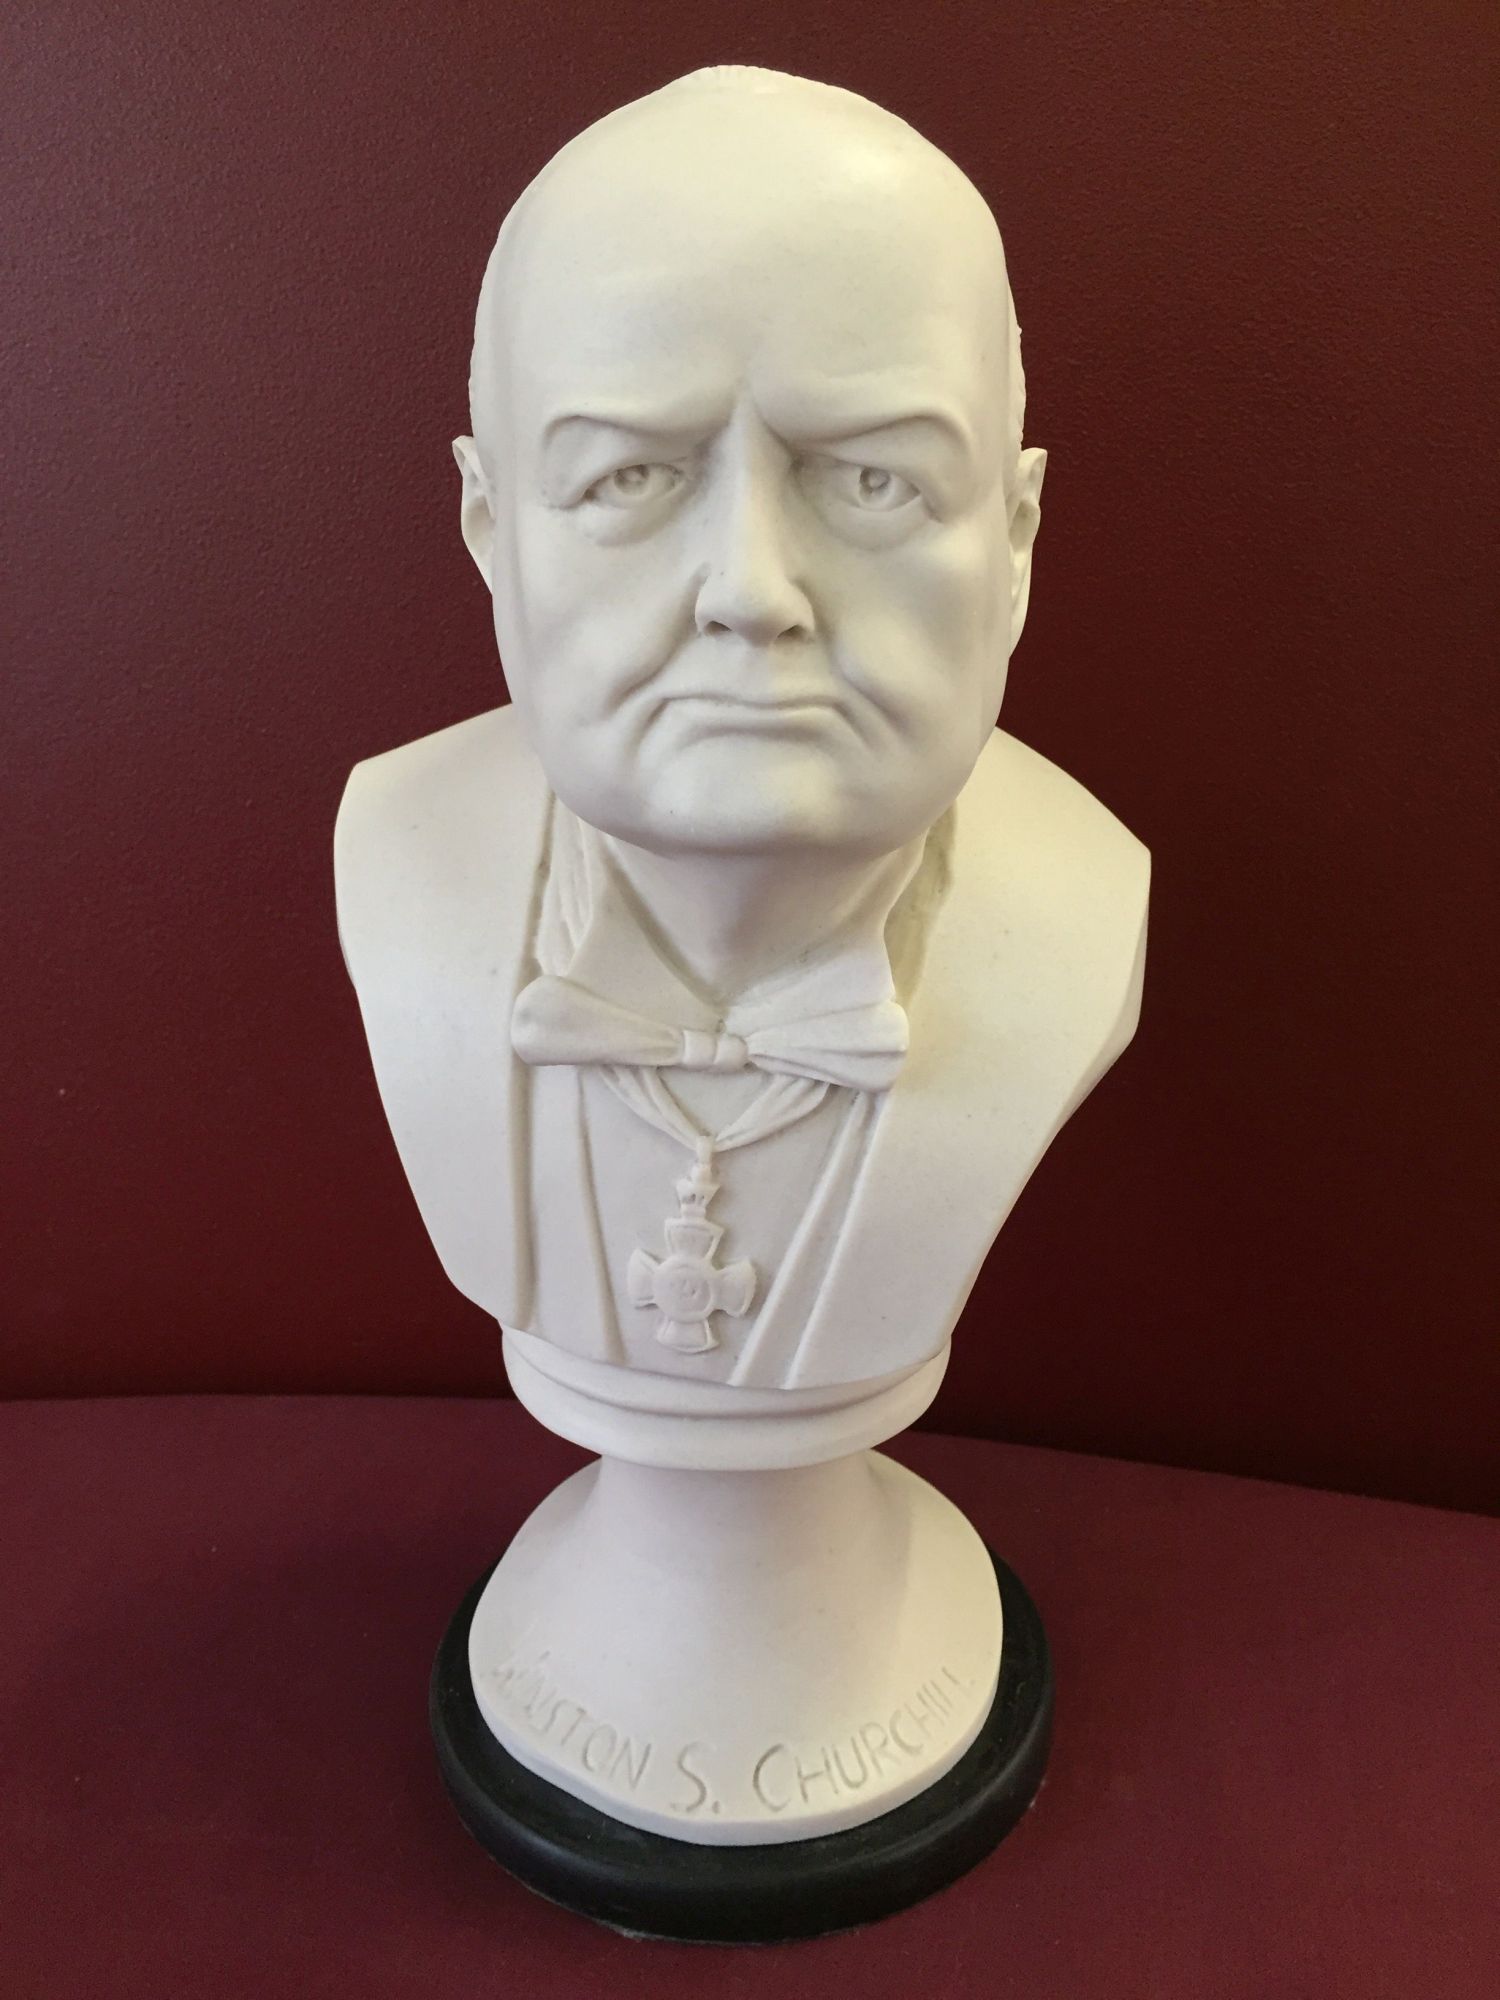 A white bust (believed to be re-constituted marble) of Winston Churchill (Approx 32cm high).